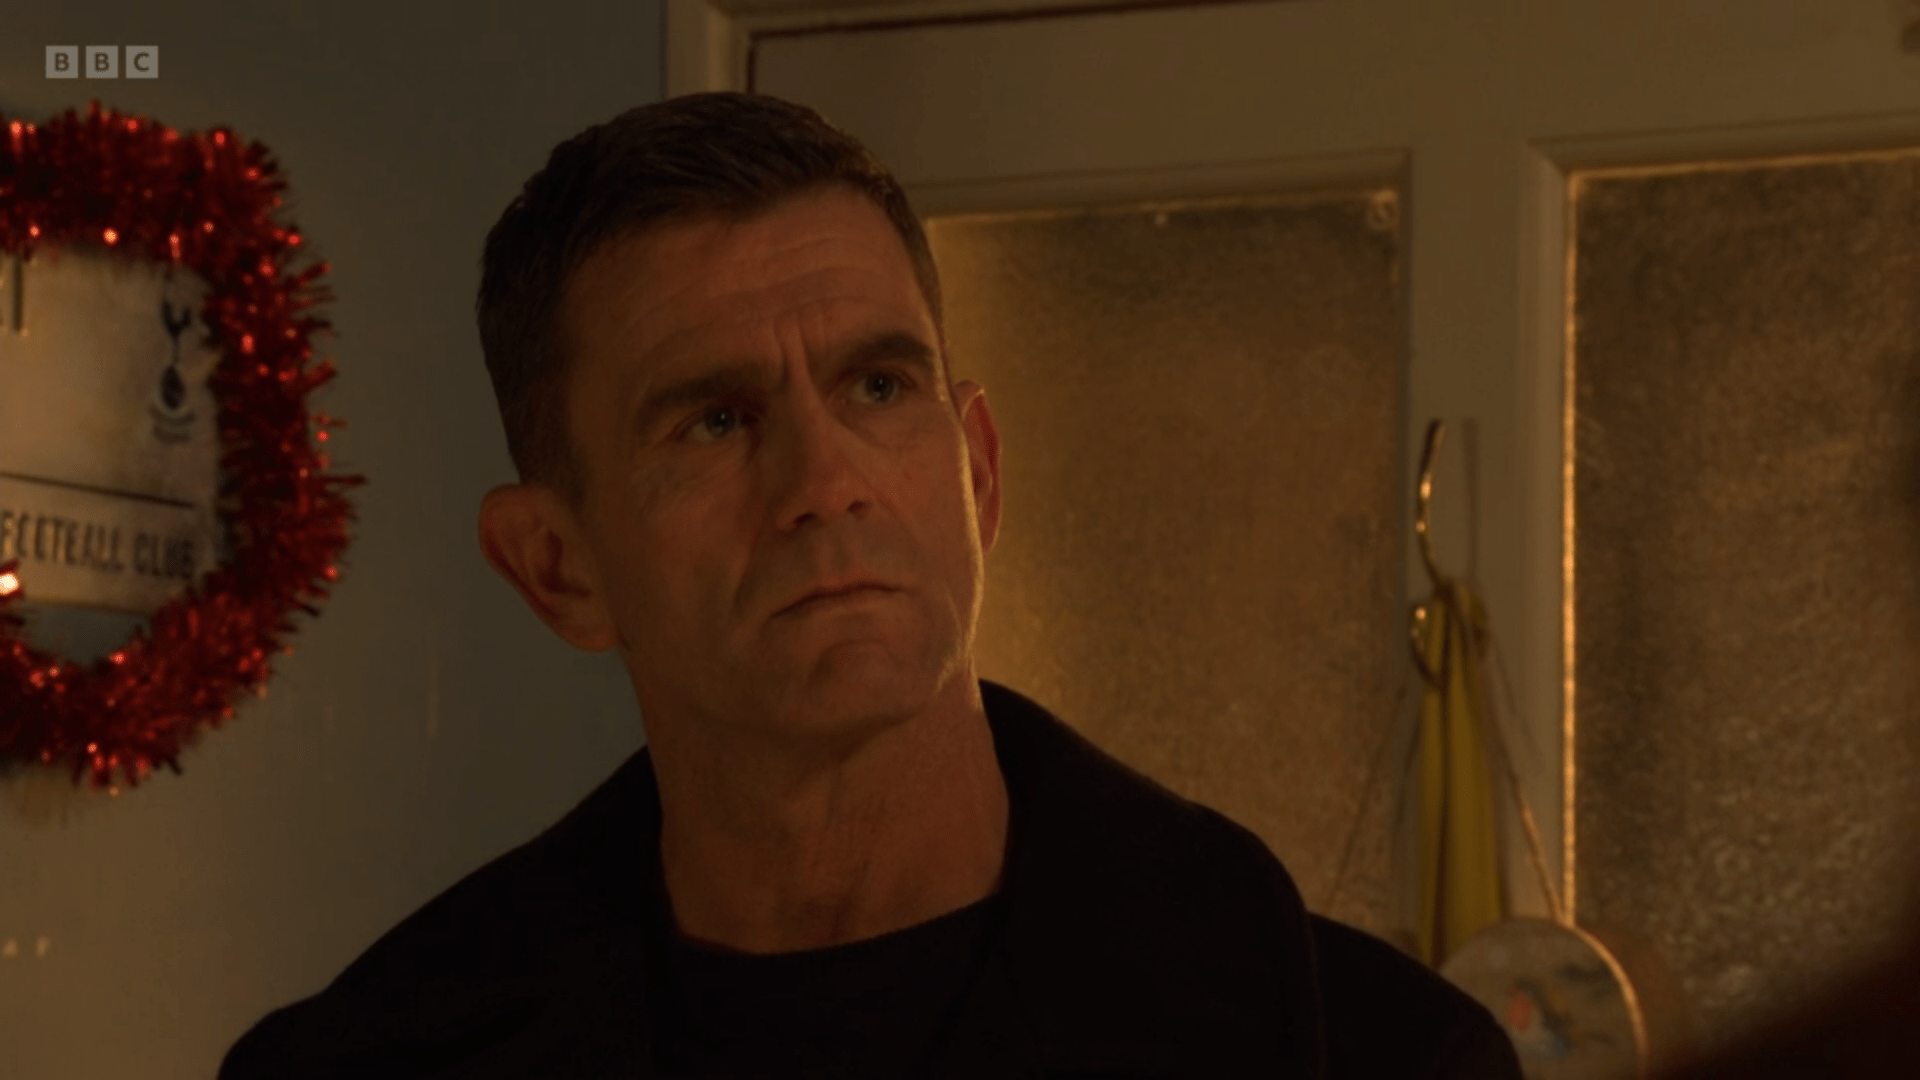 EastEnders’ Jack Branning makes chilling discovery as Nish Panesar is arrested for murder